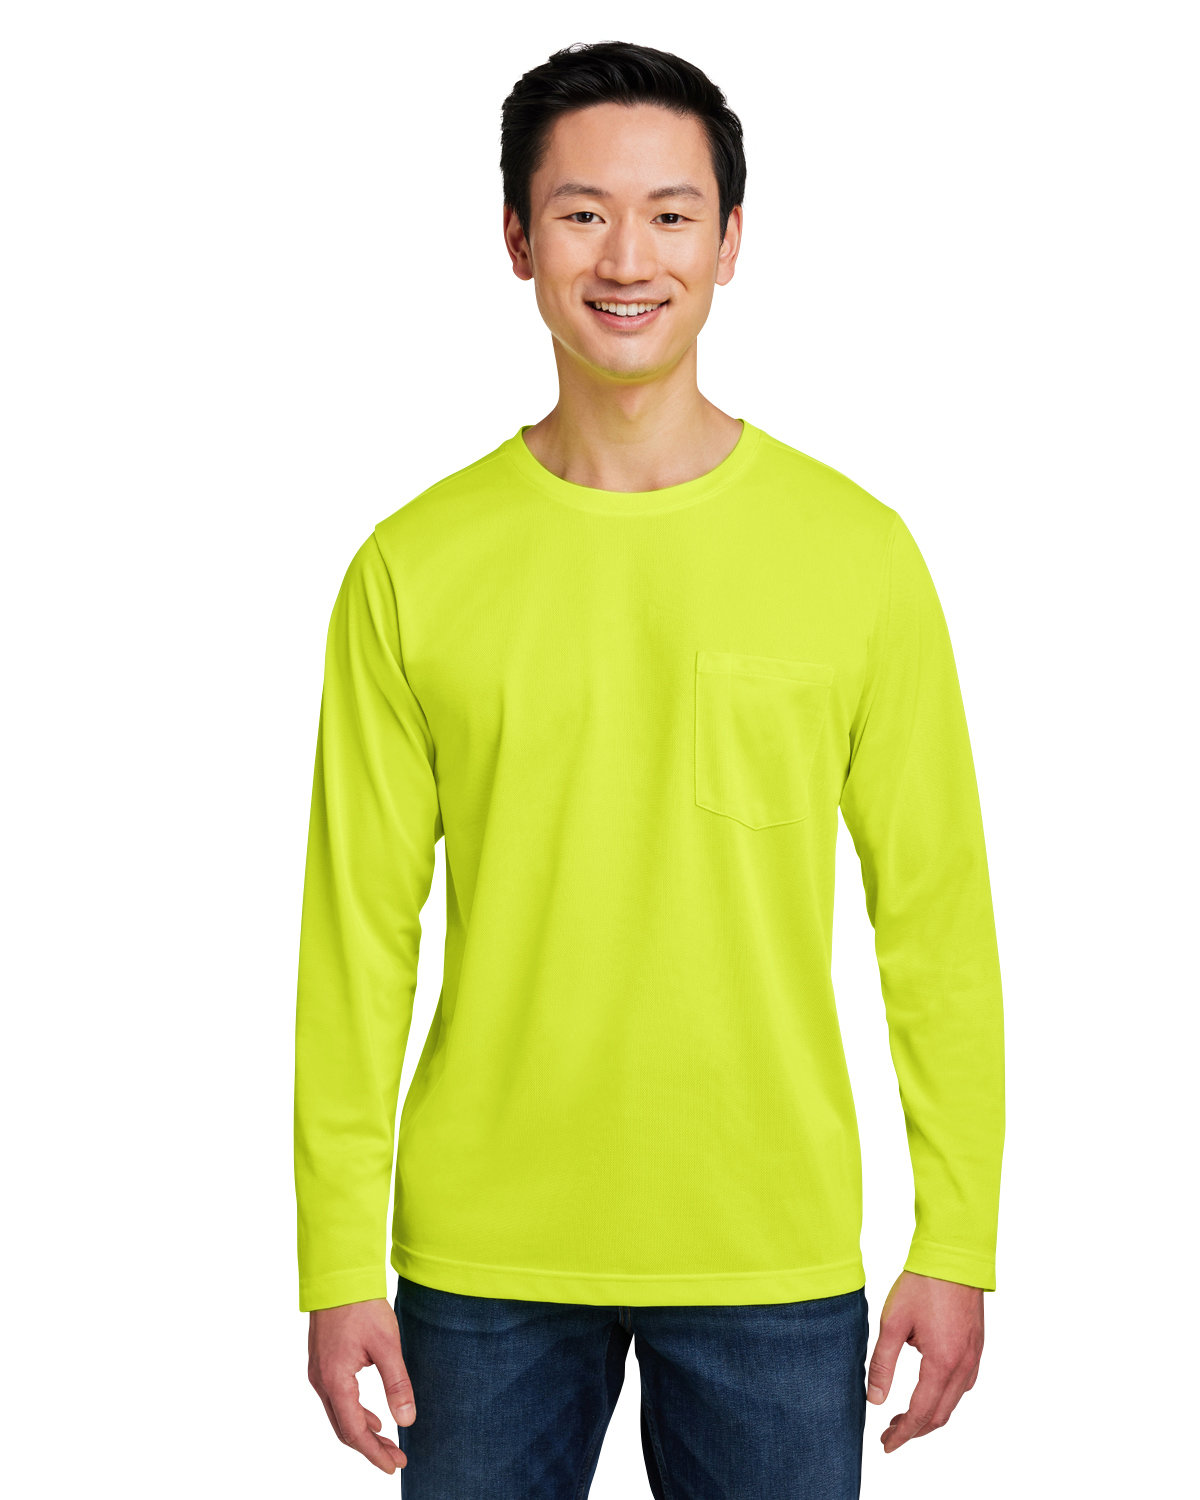 T-Shirt and Unisex | Soil Charge alphabroder Long-Sleeve Snag Harriton Protect